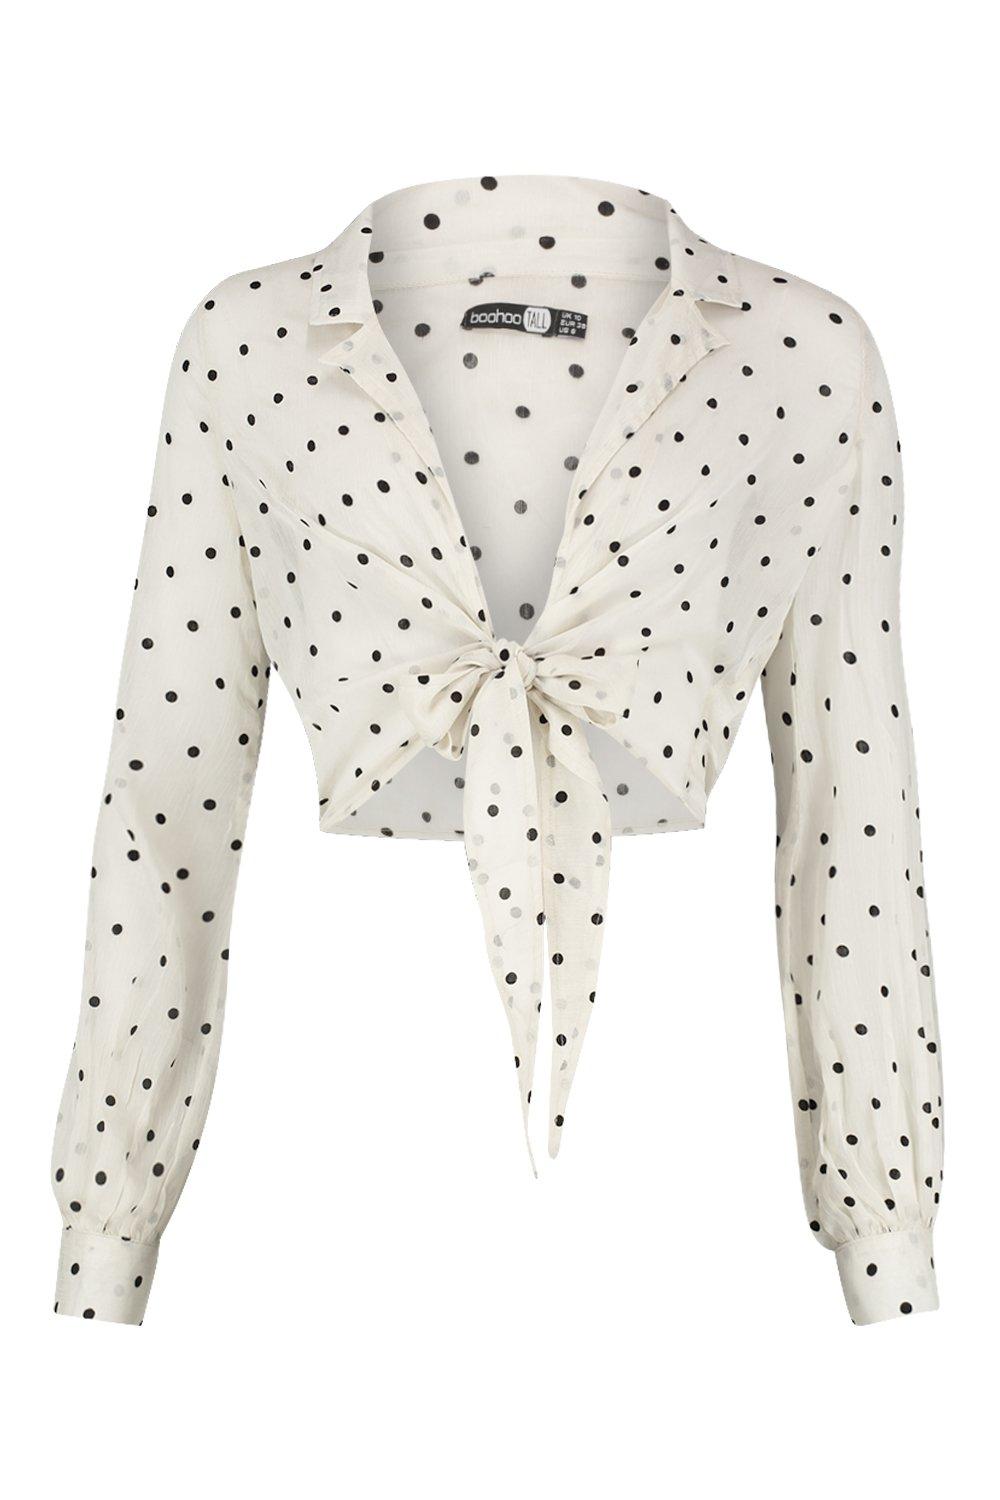 Dotted Tie Front Plunge White Sheer Mesh Lace Peplum Top Blouse – sunifty